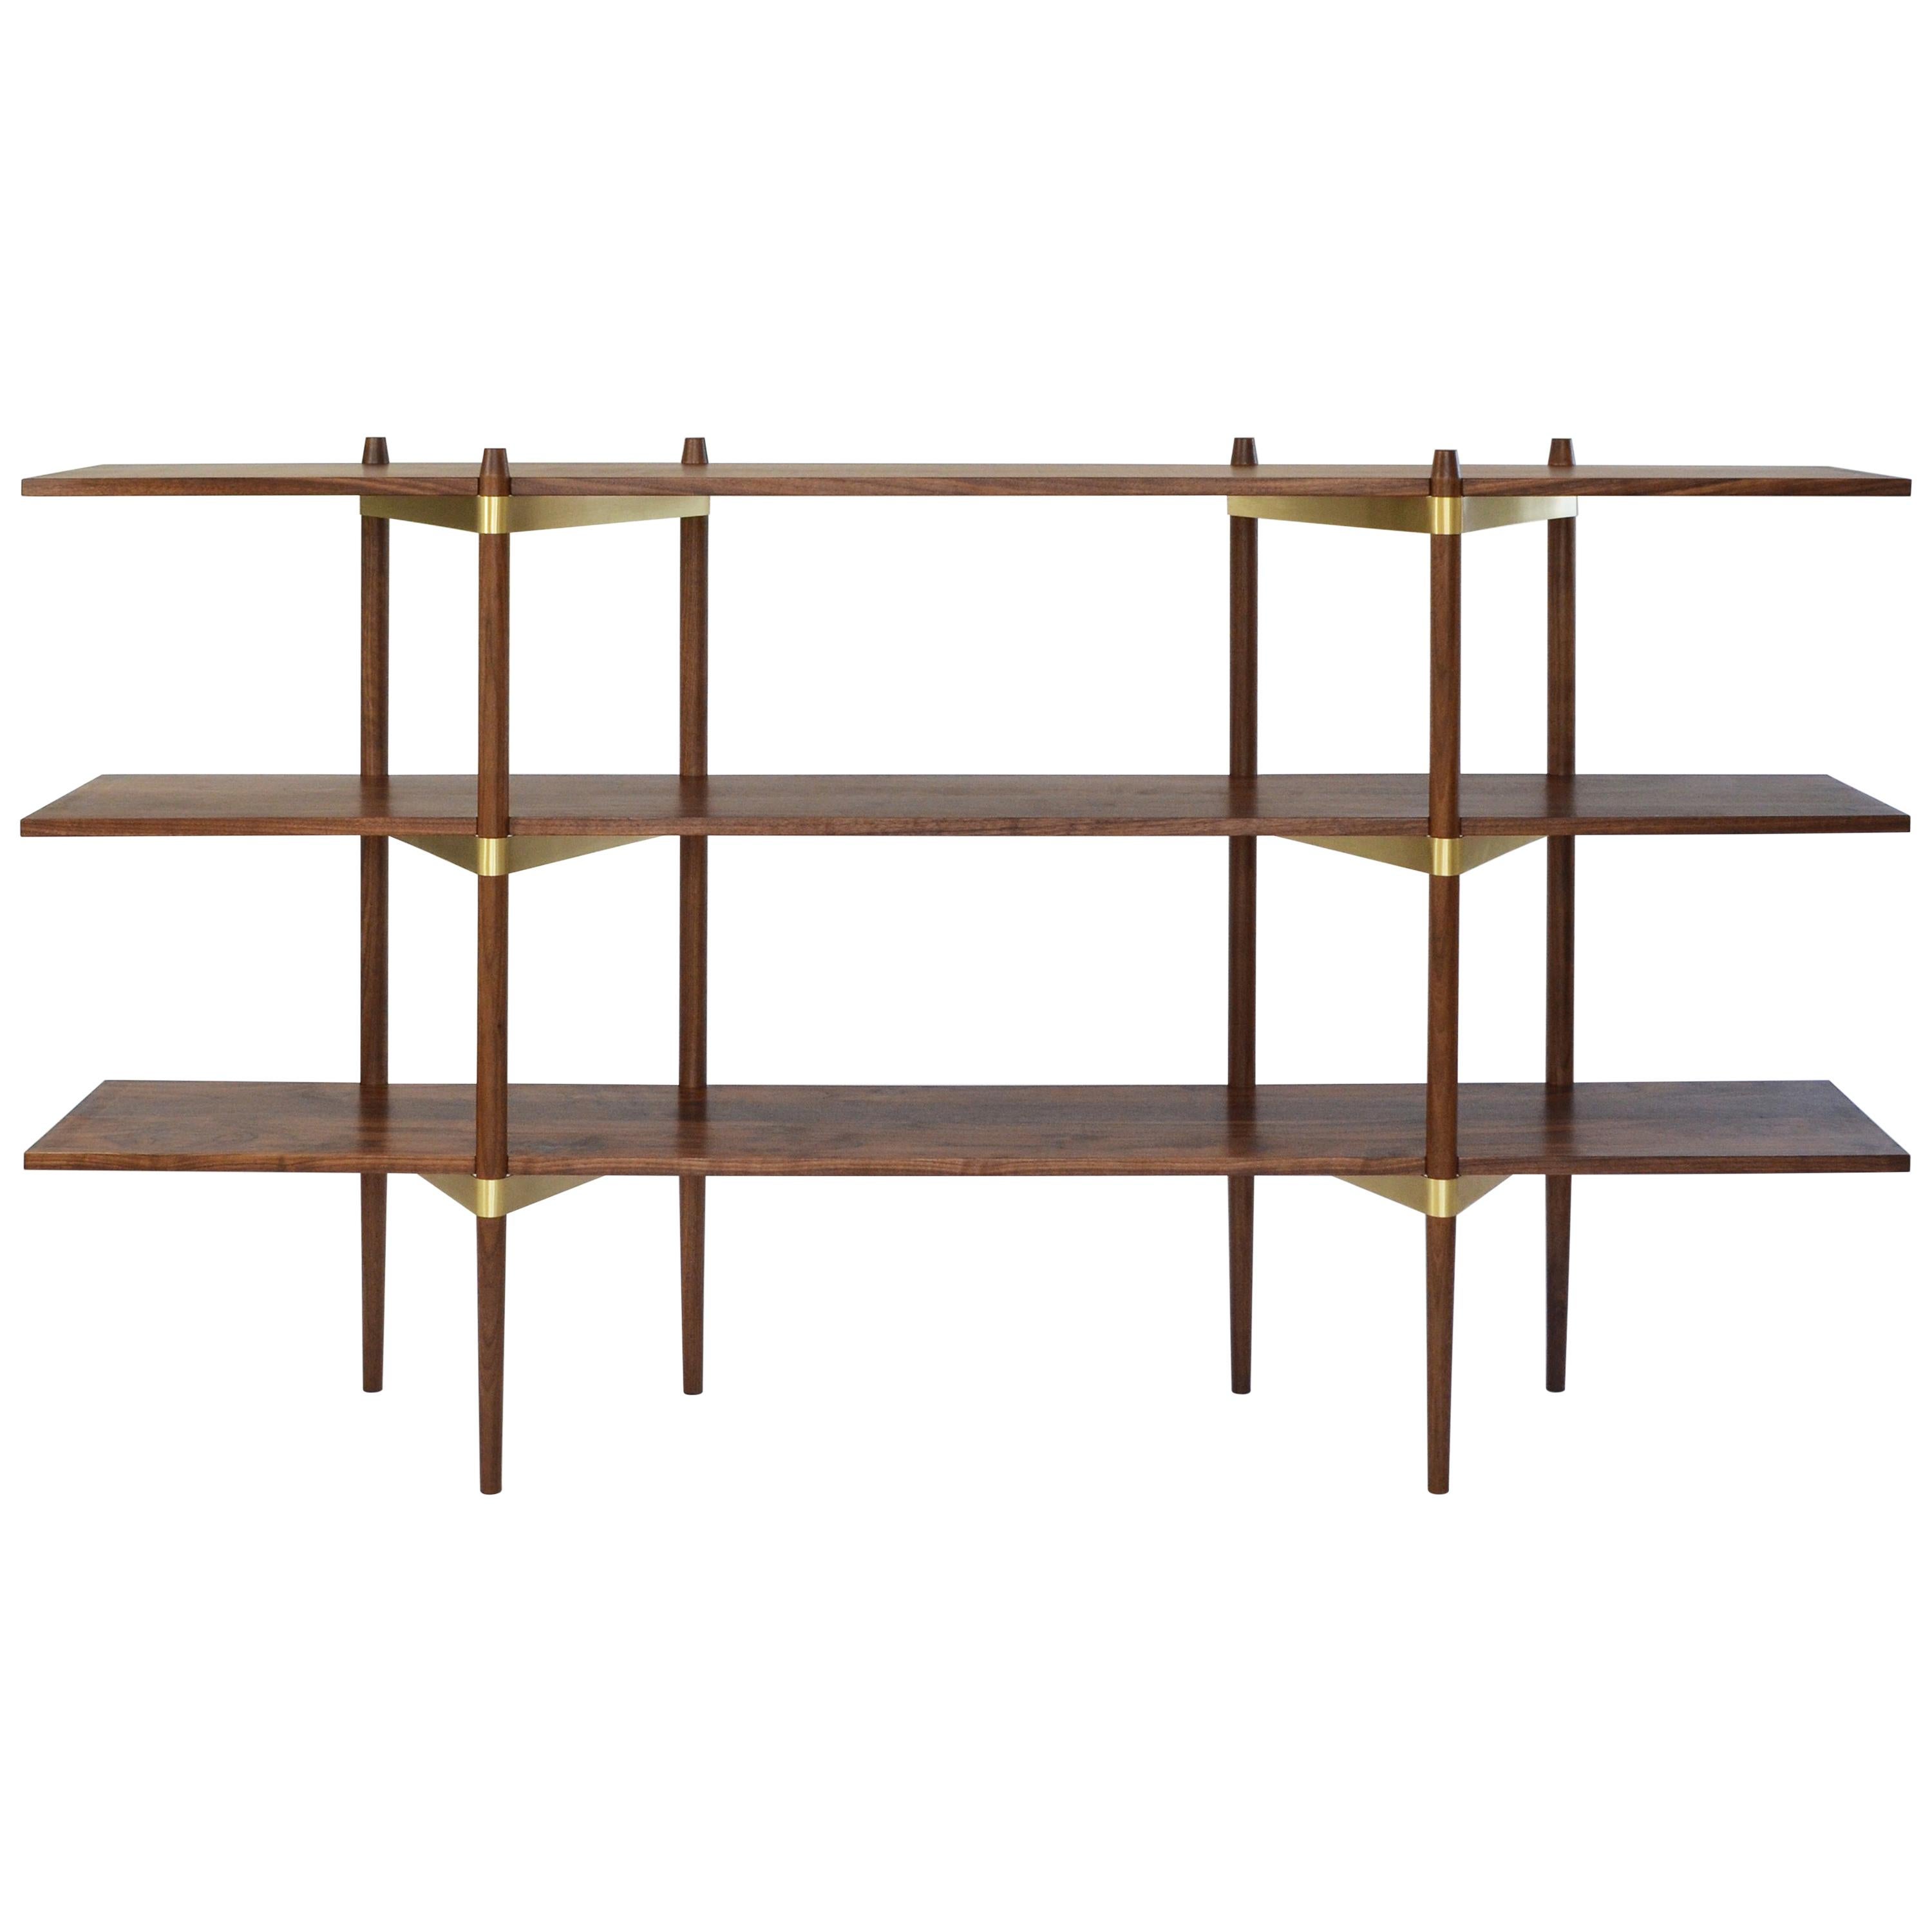 Casey Lurie Studio Modern Low "Primo" Shelving System in Walnut with Brass